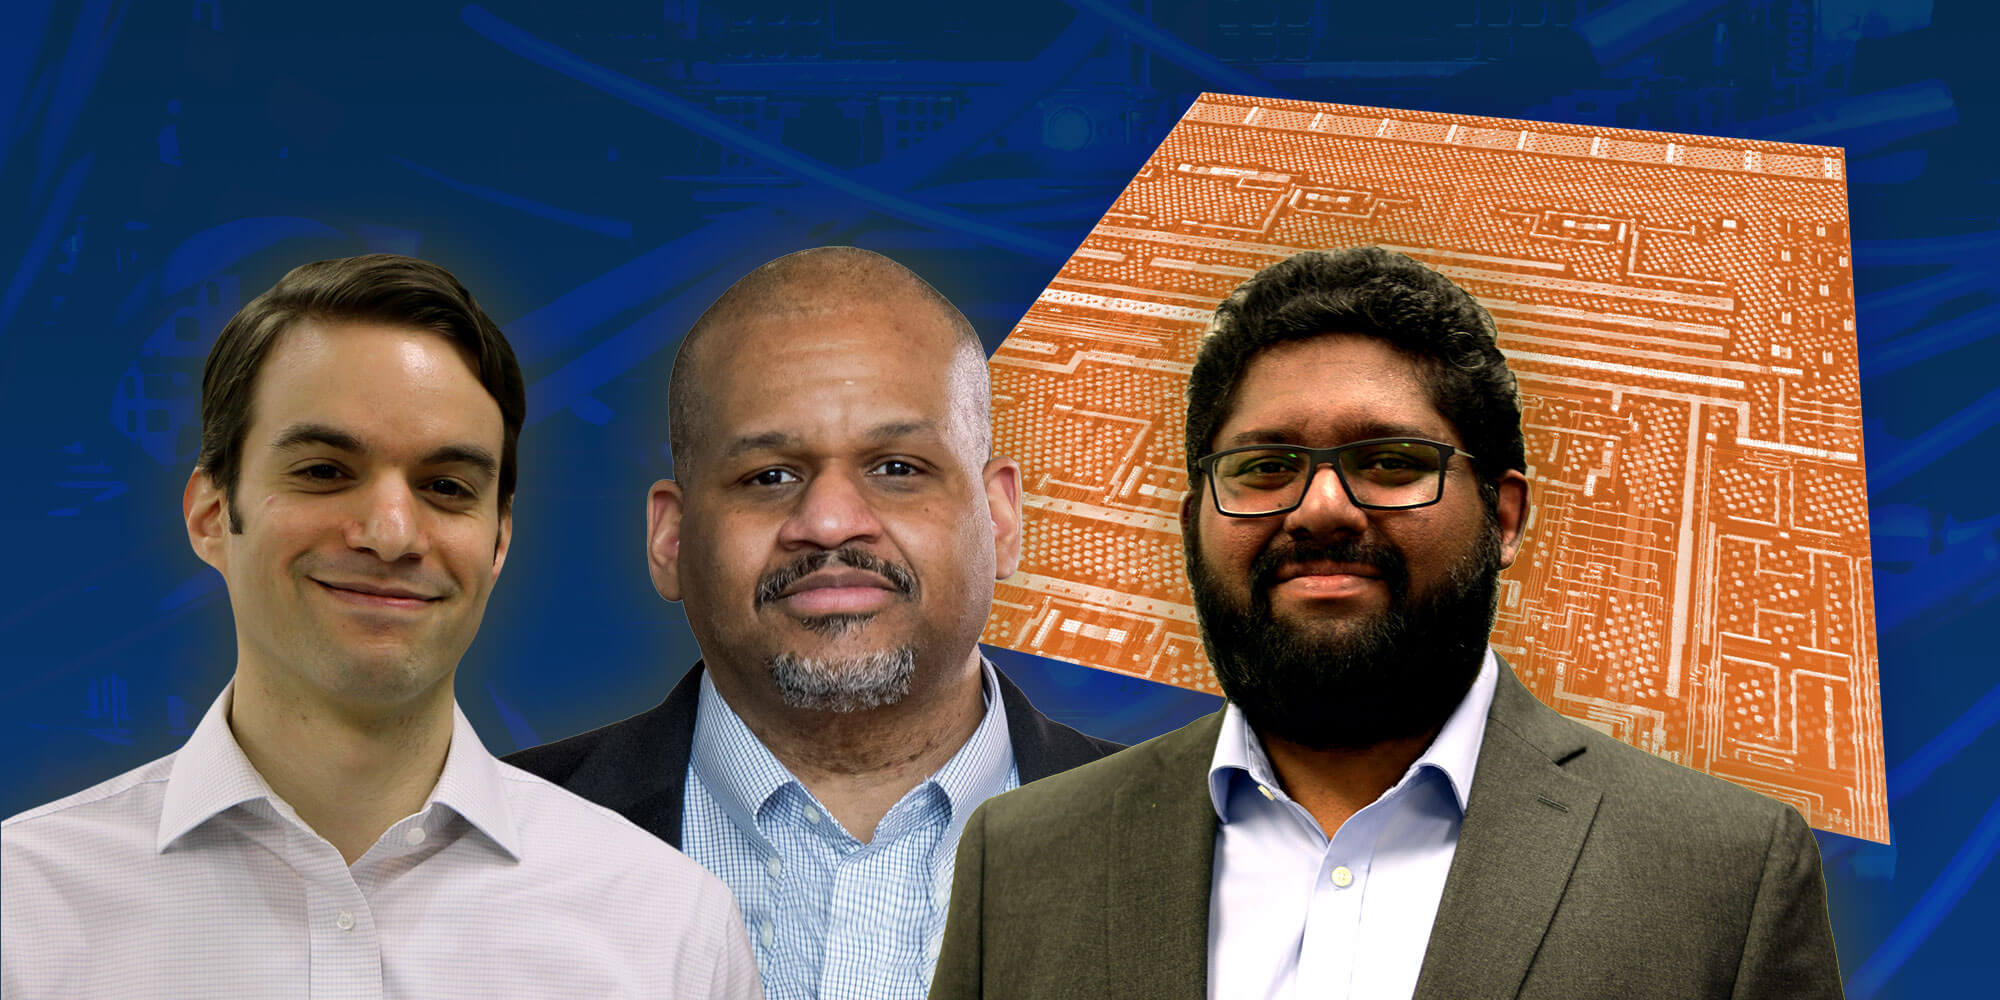 From left: Domenic Forte, Ph.D., Steven A. Yatauro Fellow and associate professor in the Department of Electrical and Computer Engineering; Damon Woodard, Ph.D., director of the Florida Institute for National Security and associate professor in the Department of Electrical and Computer Engineering; and Ronald Wilson, Ph.D., post-doctoral researcher in Electrical and Computer Engineering